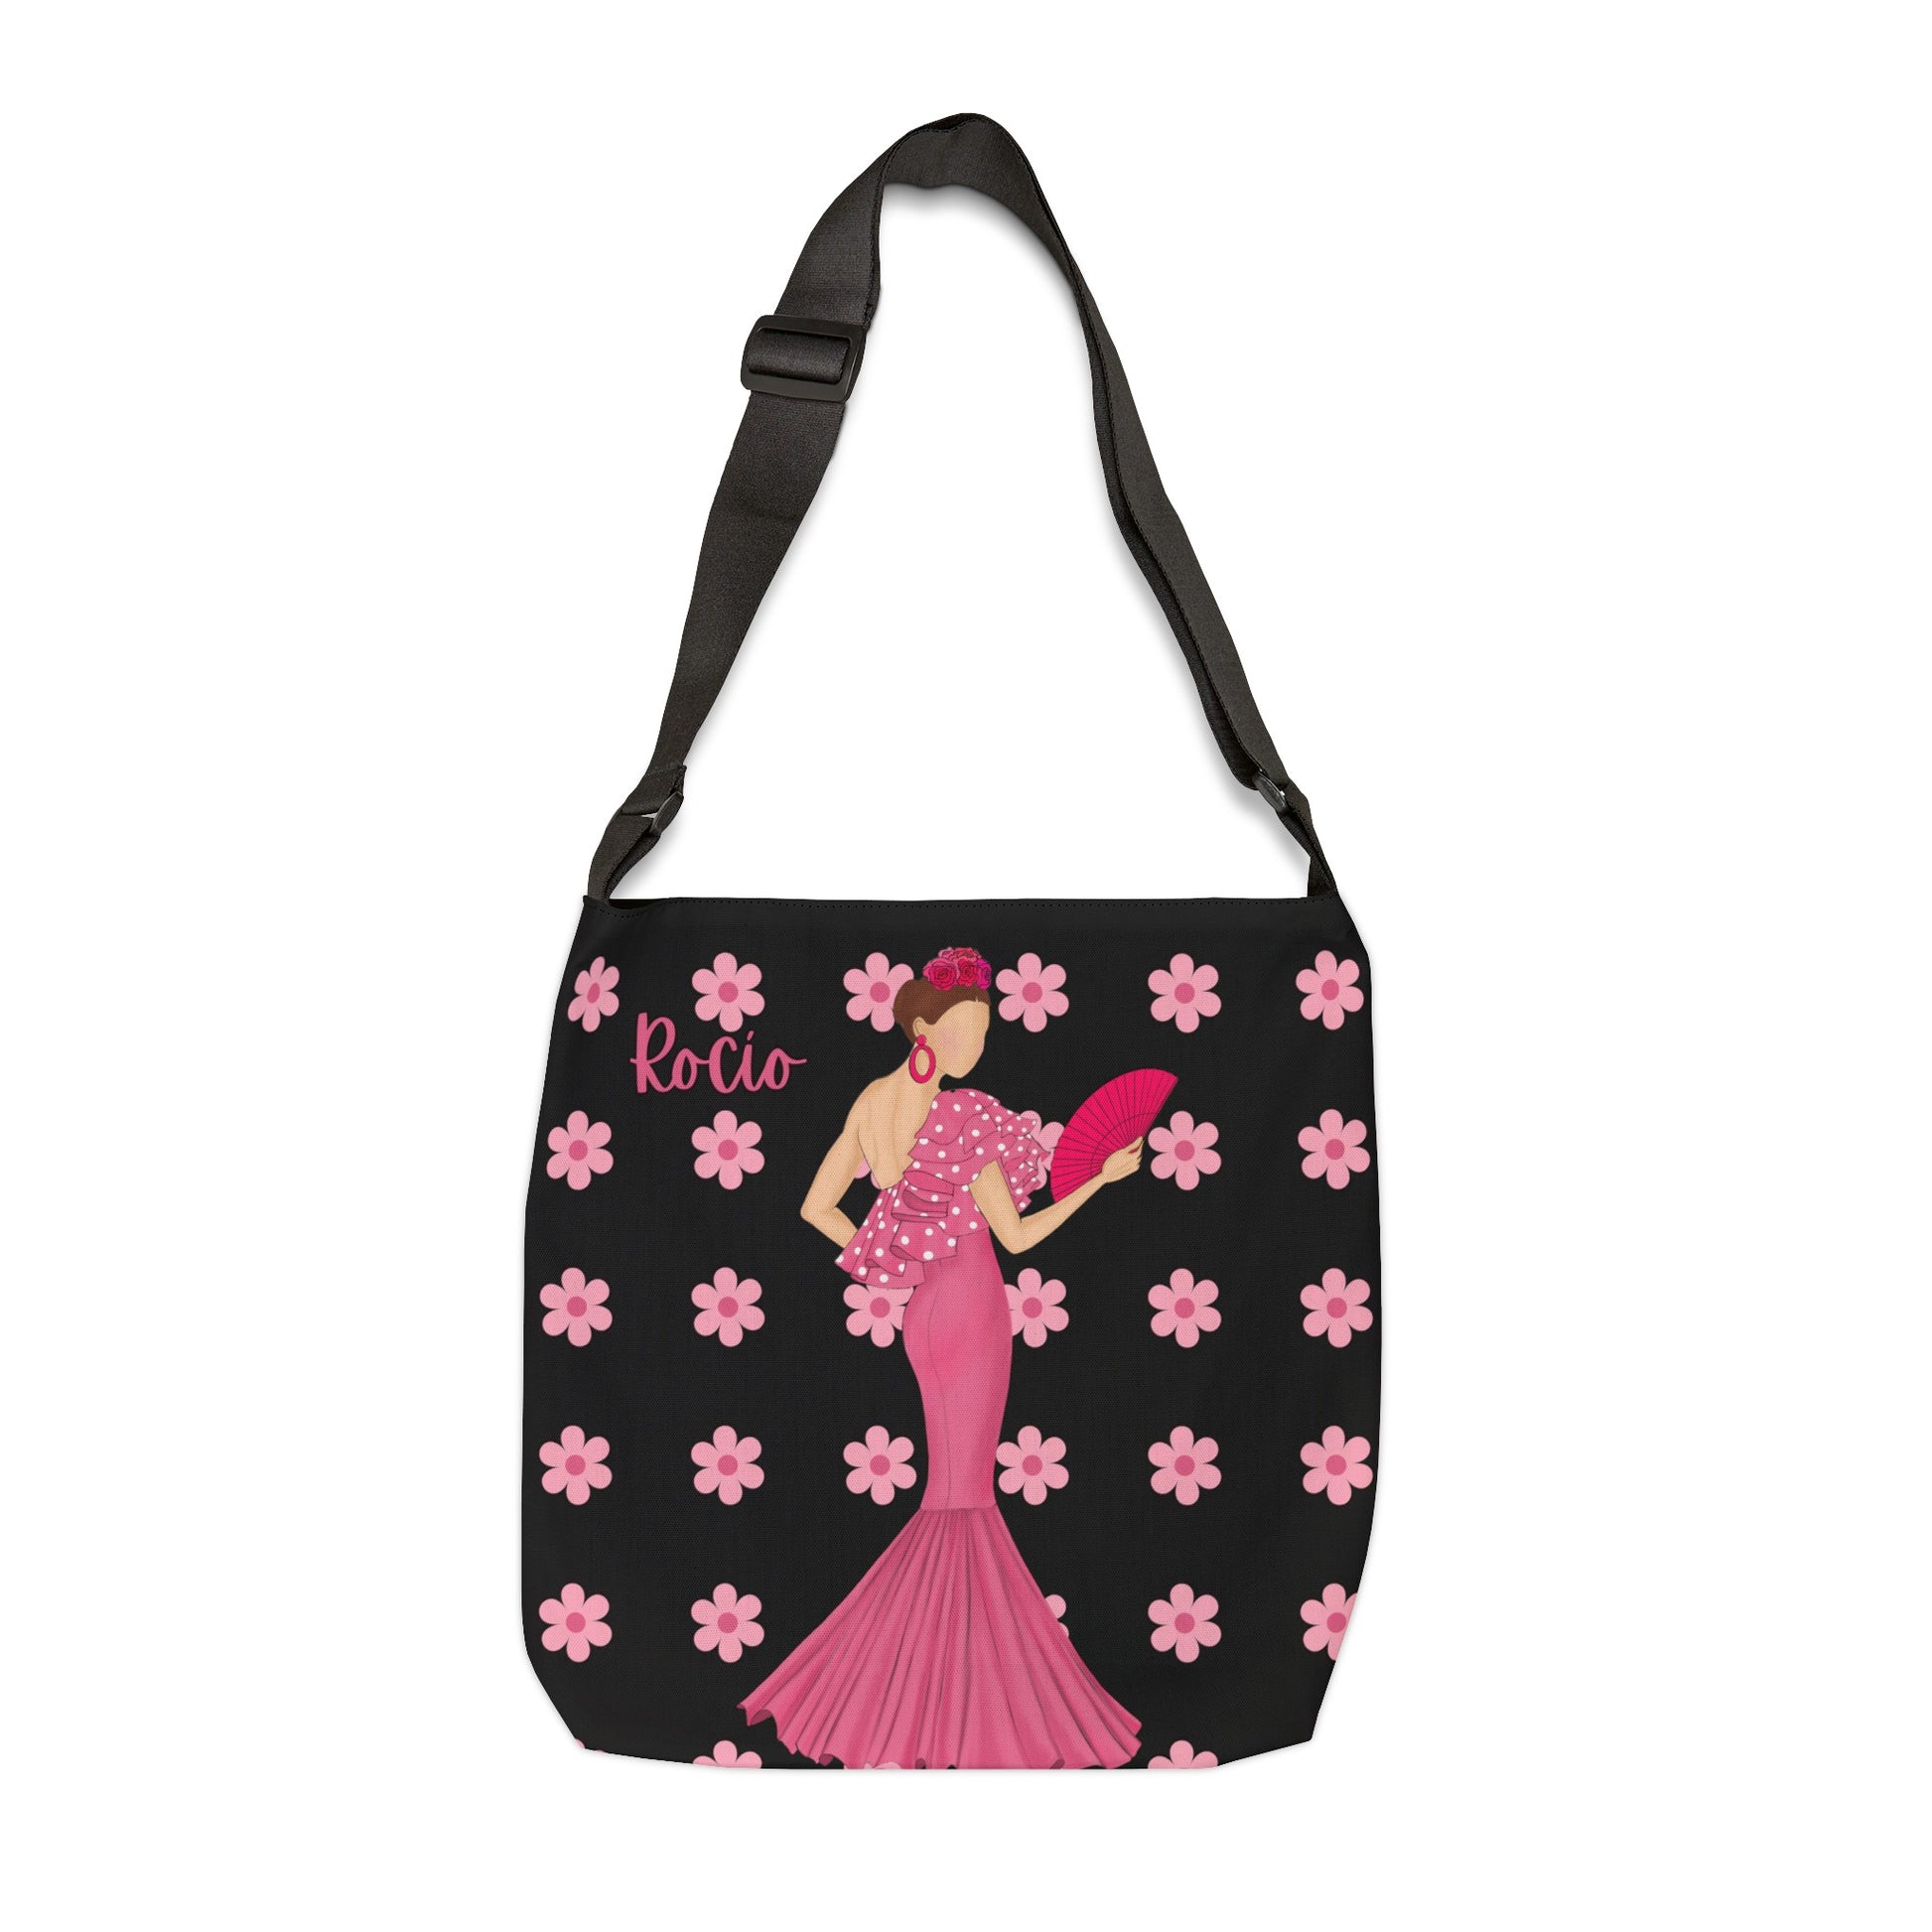 a black and pink purse with a woman in a pink dress